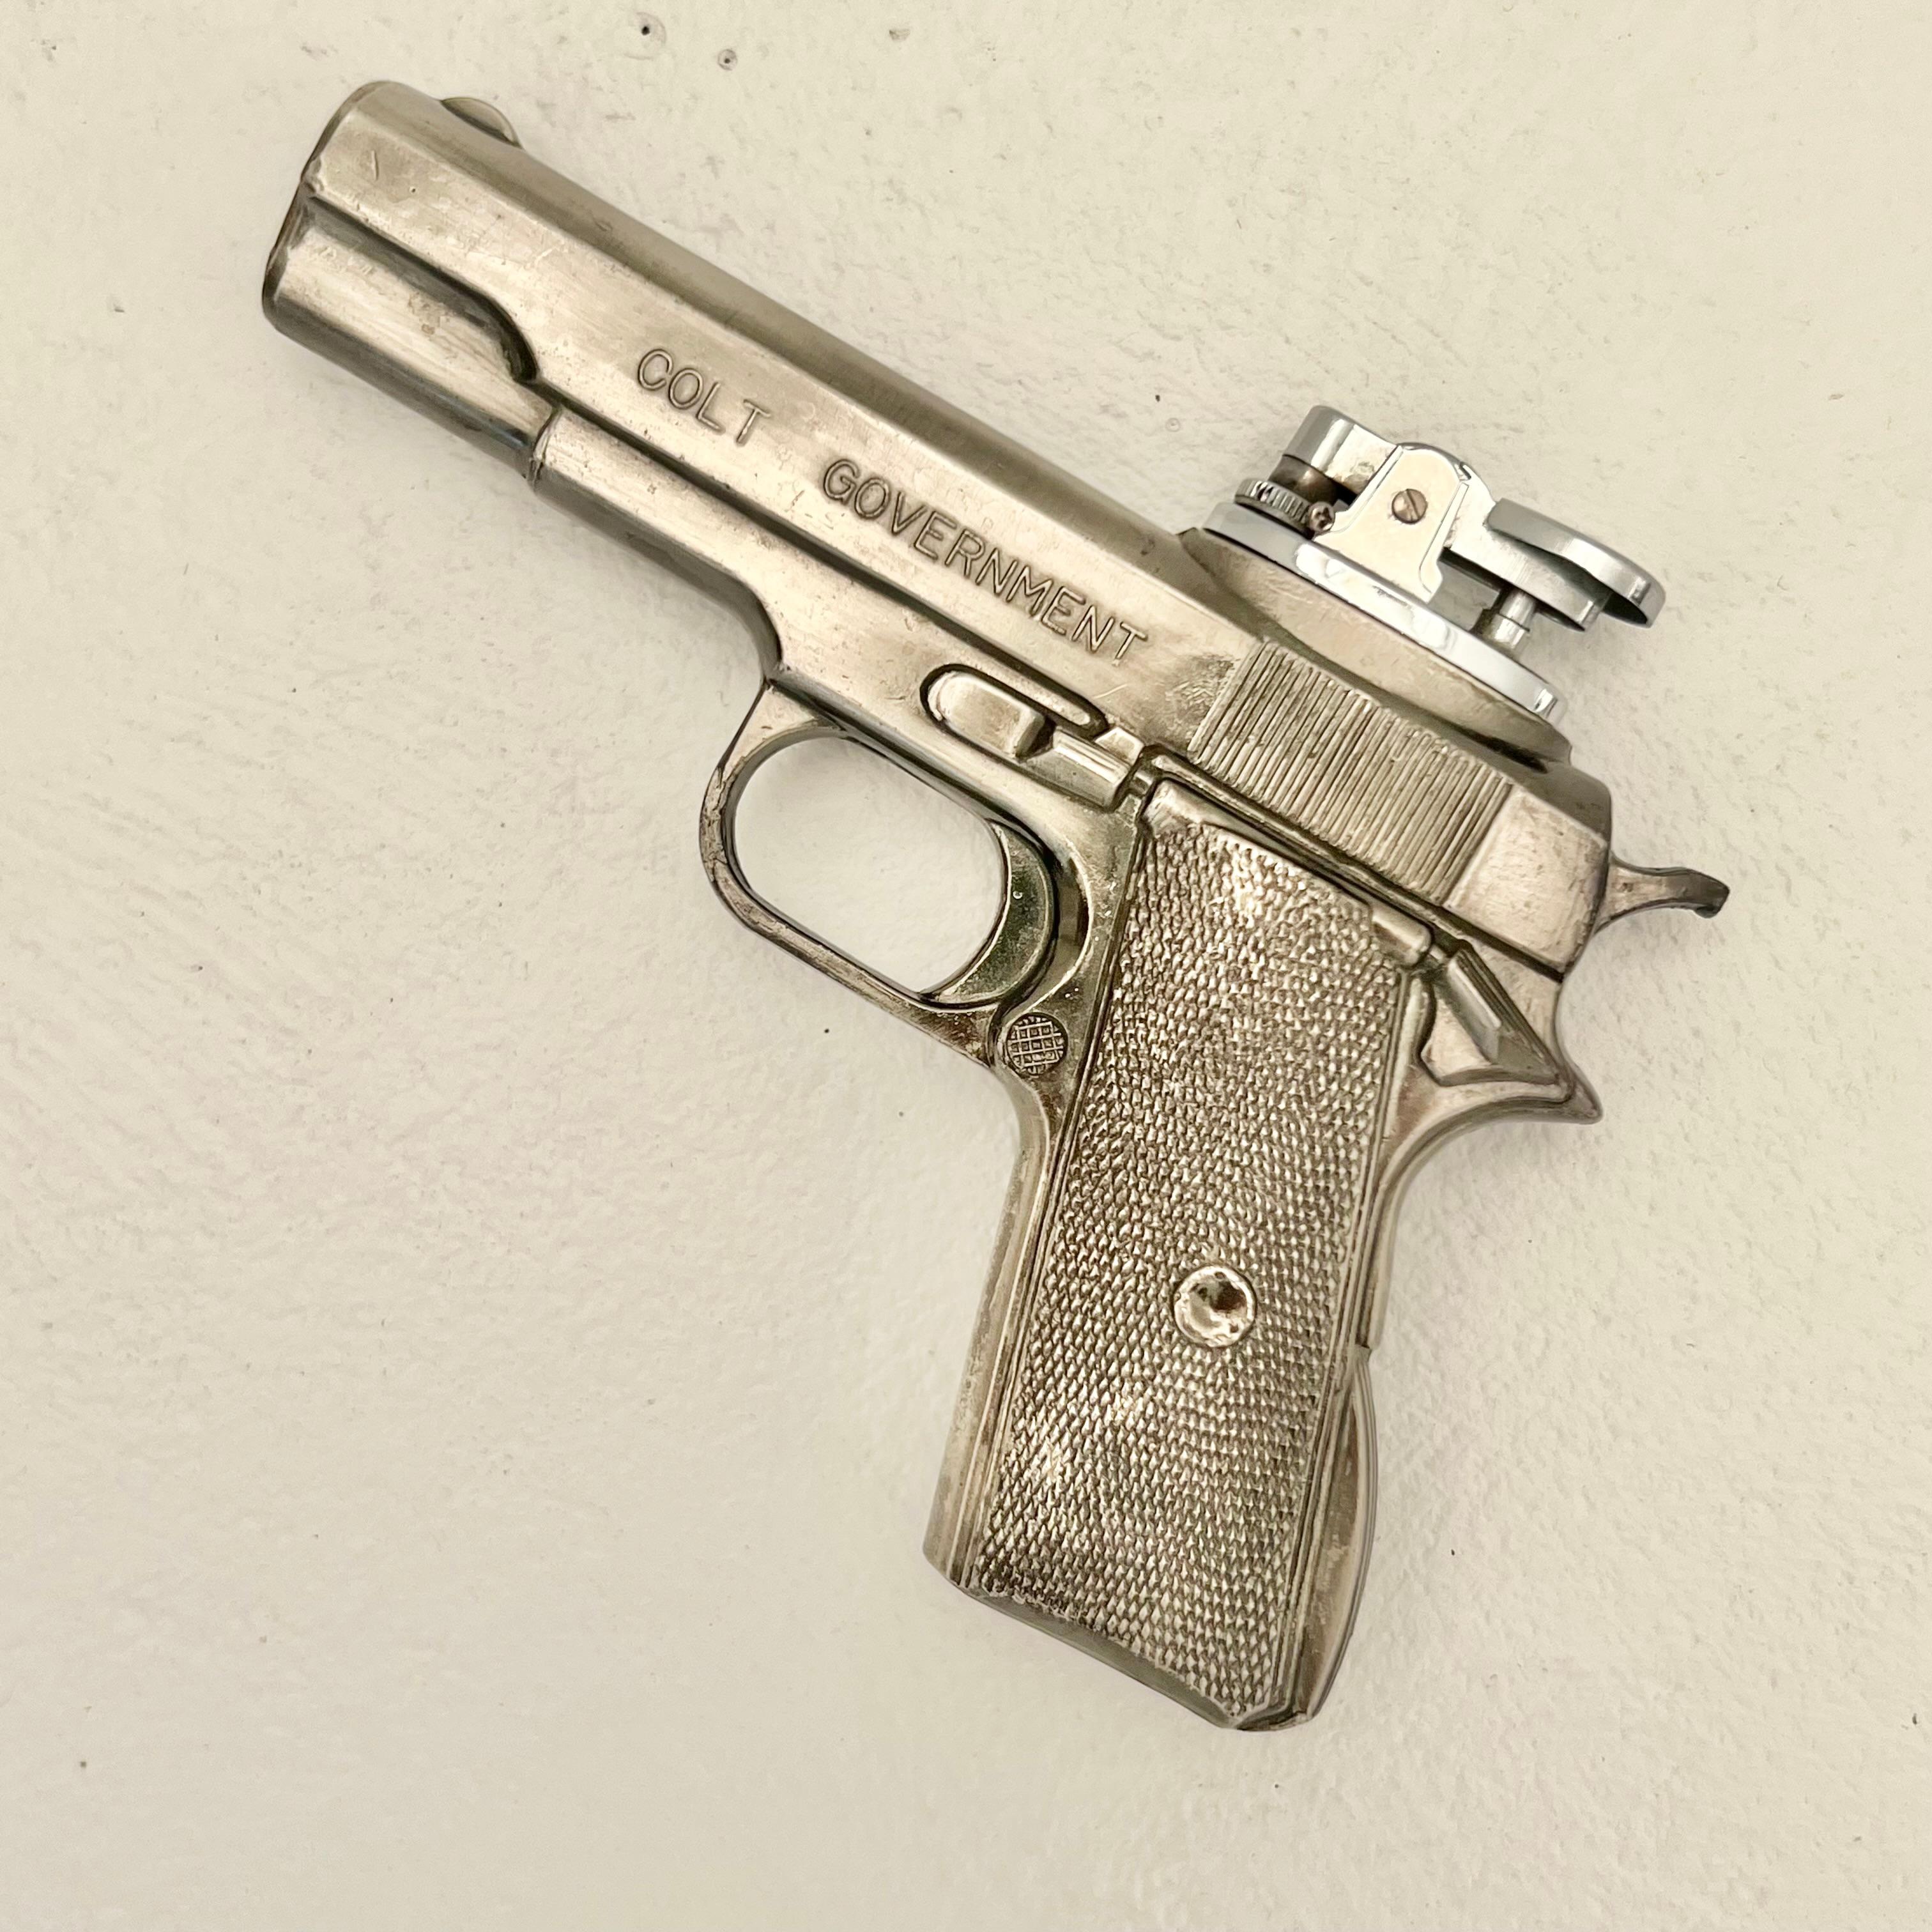 Vintage table lighter in the shape of a Colt handgun. Works perfectly. Modeled after a Colt Government handgun. Made of metal in Japan. Good working condition and fun object. Sold out of Comoy's of London. 

